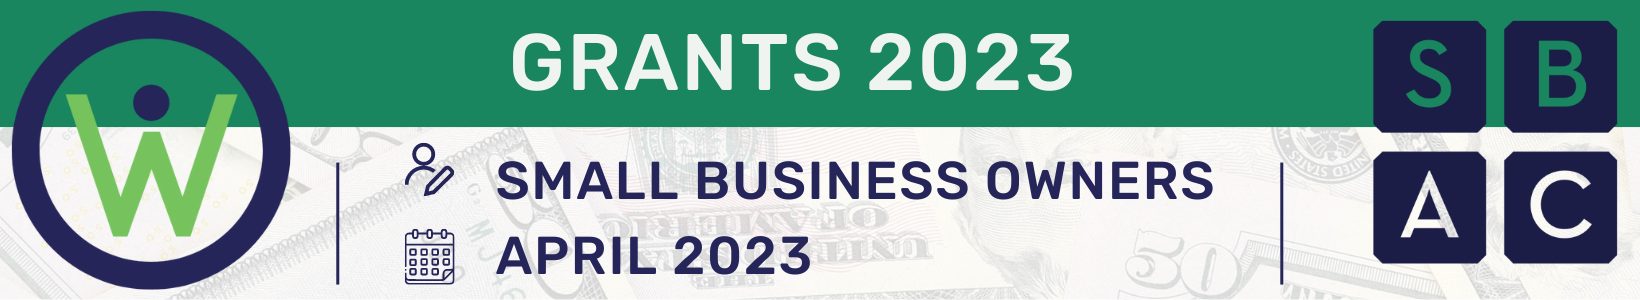 Grants for small Businesses (1640 × 300 px)